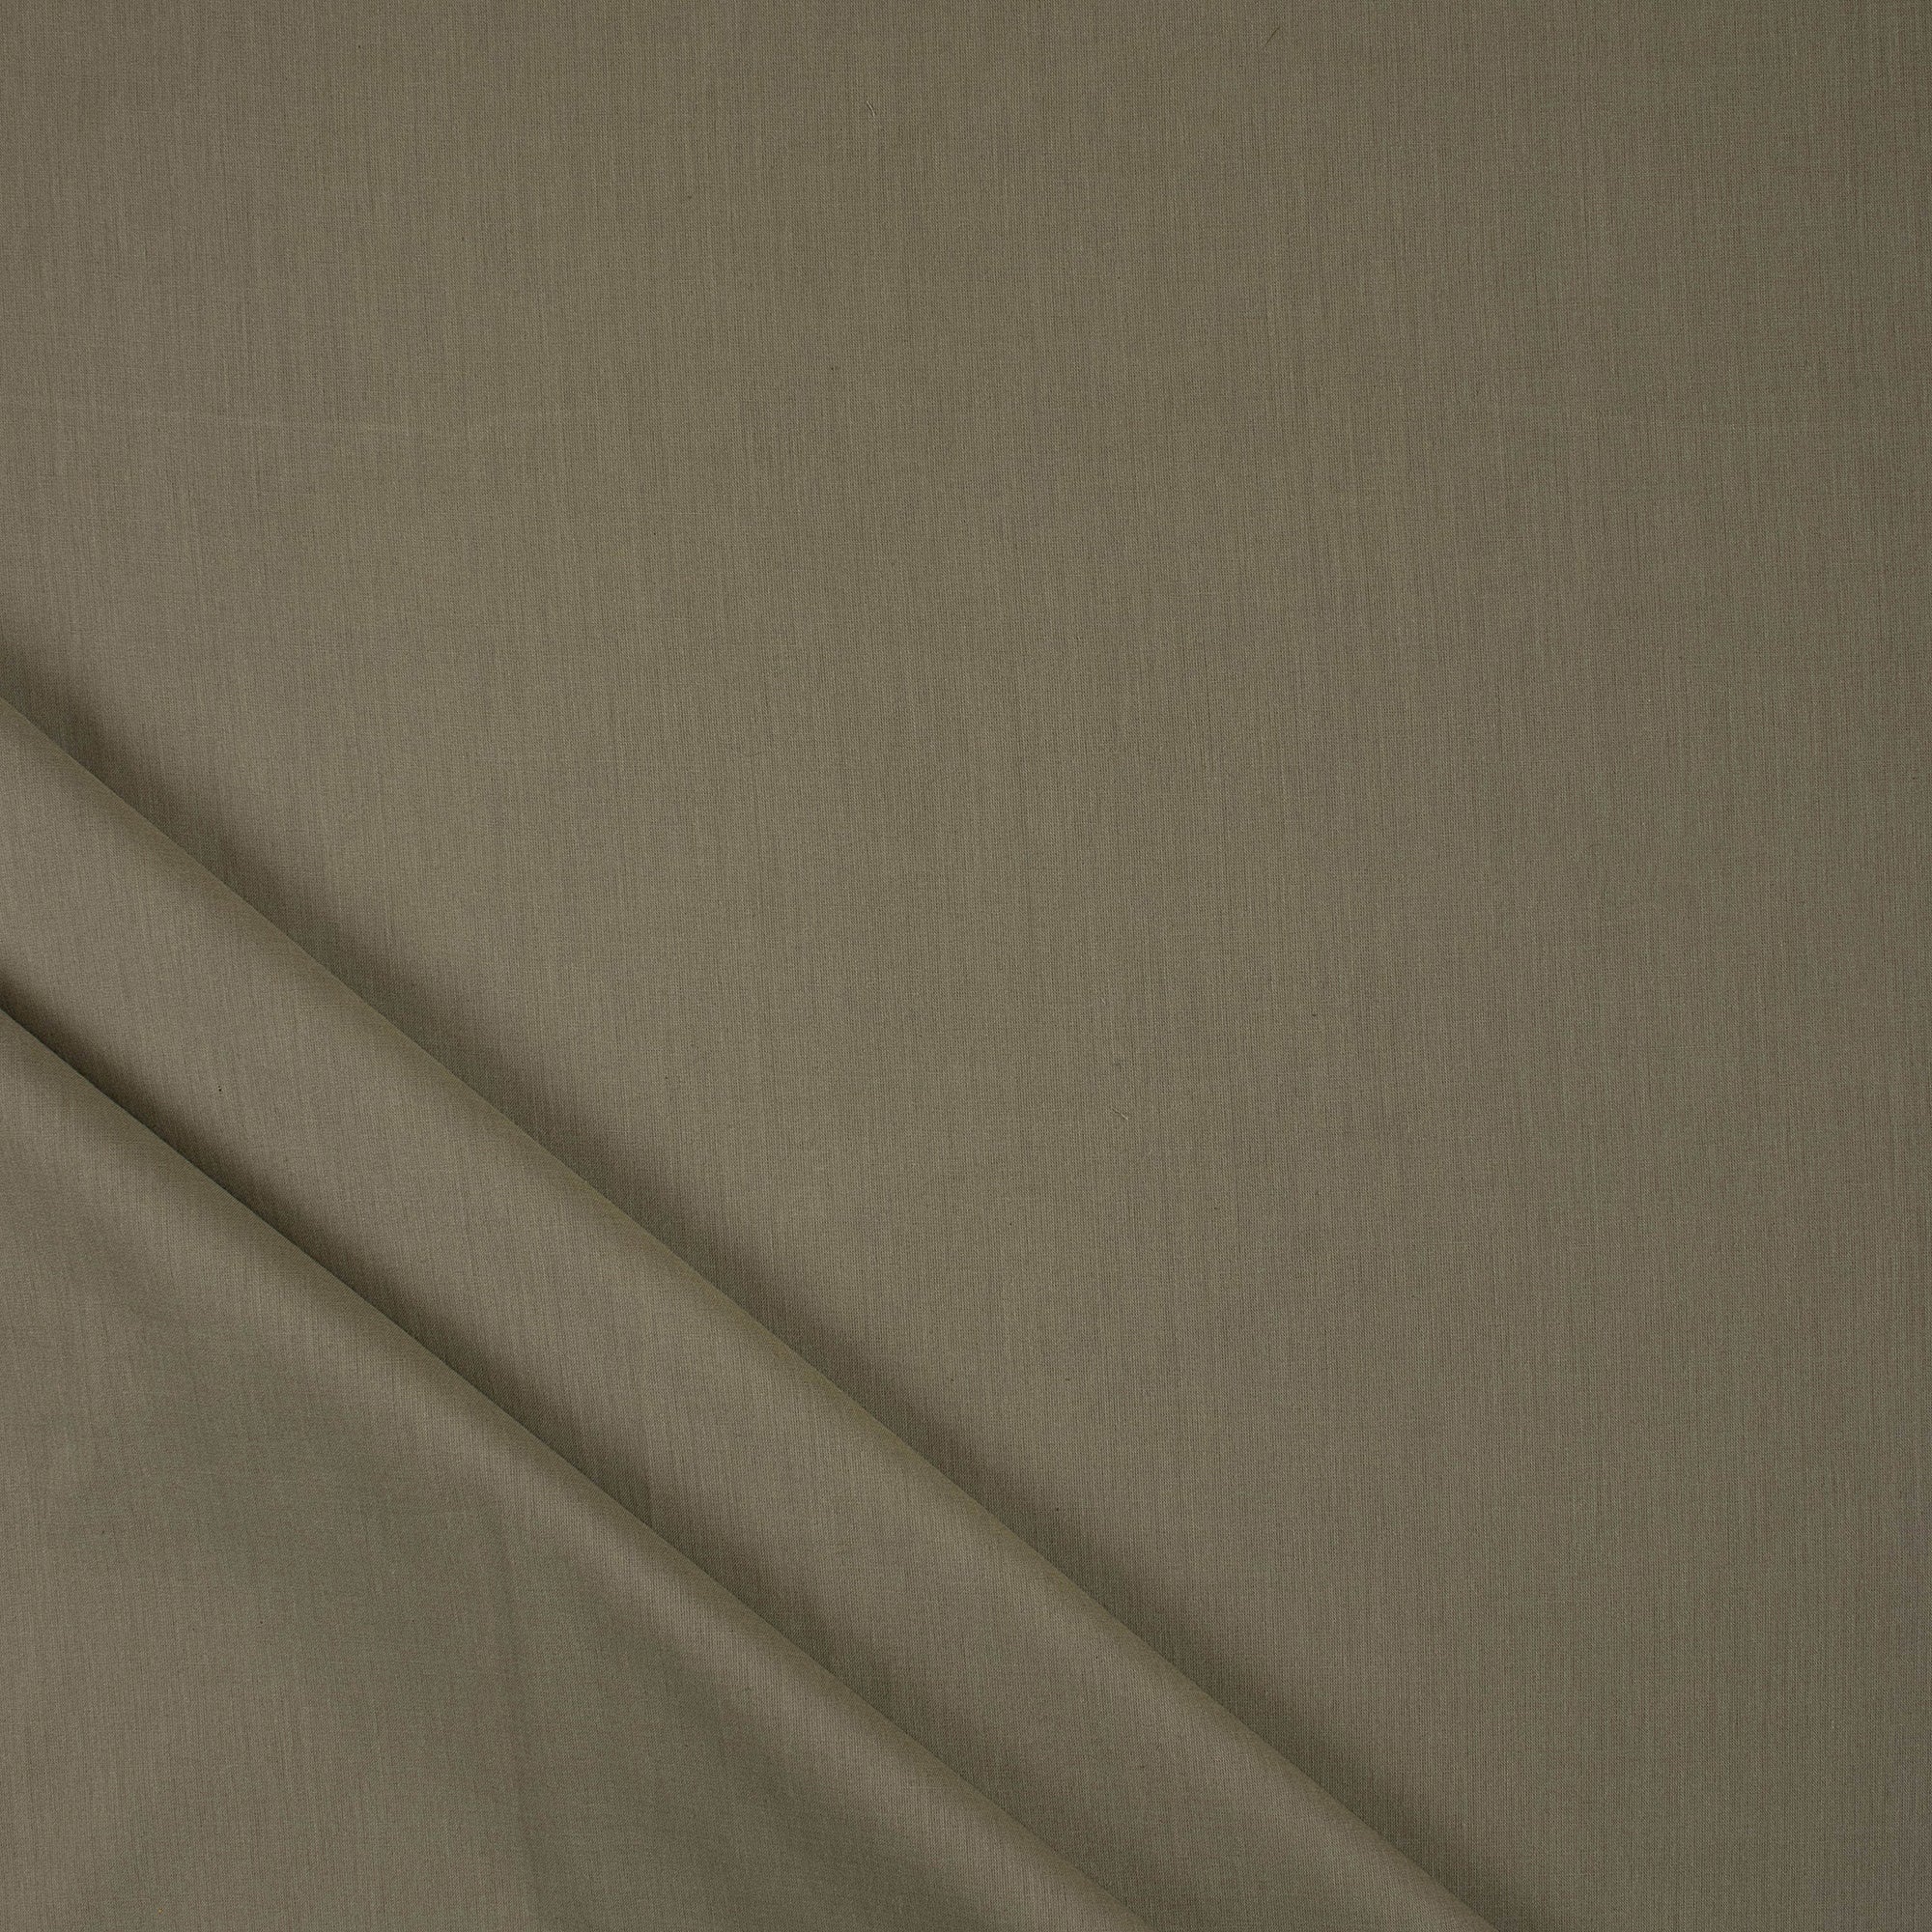 Soft Cotton Natural Dyed Solid Grey Fabric